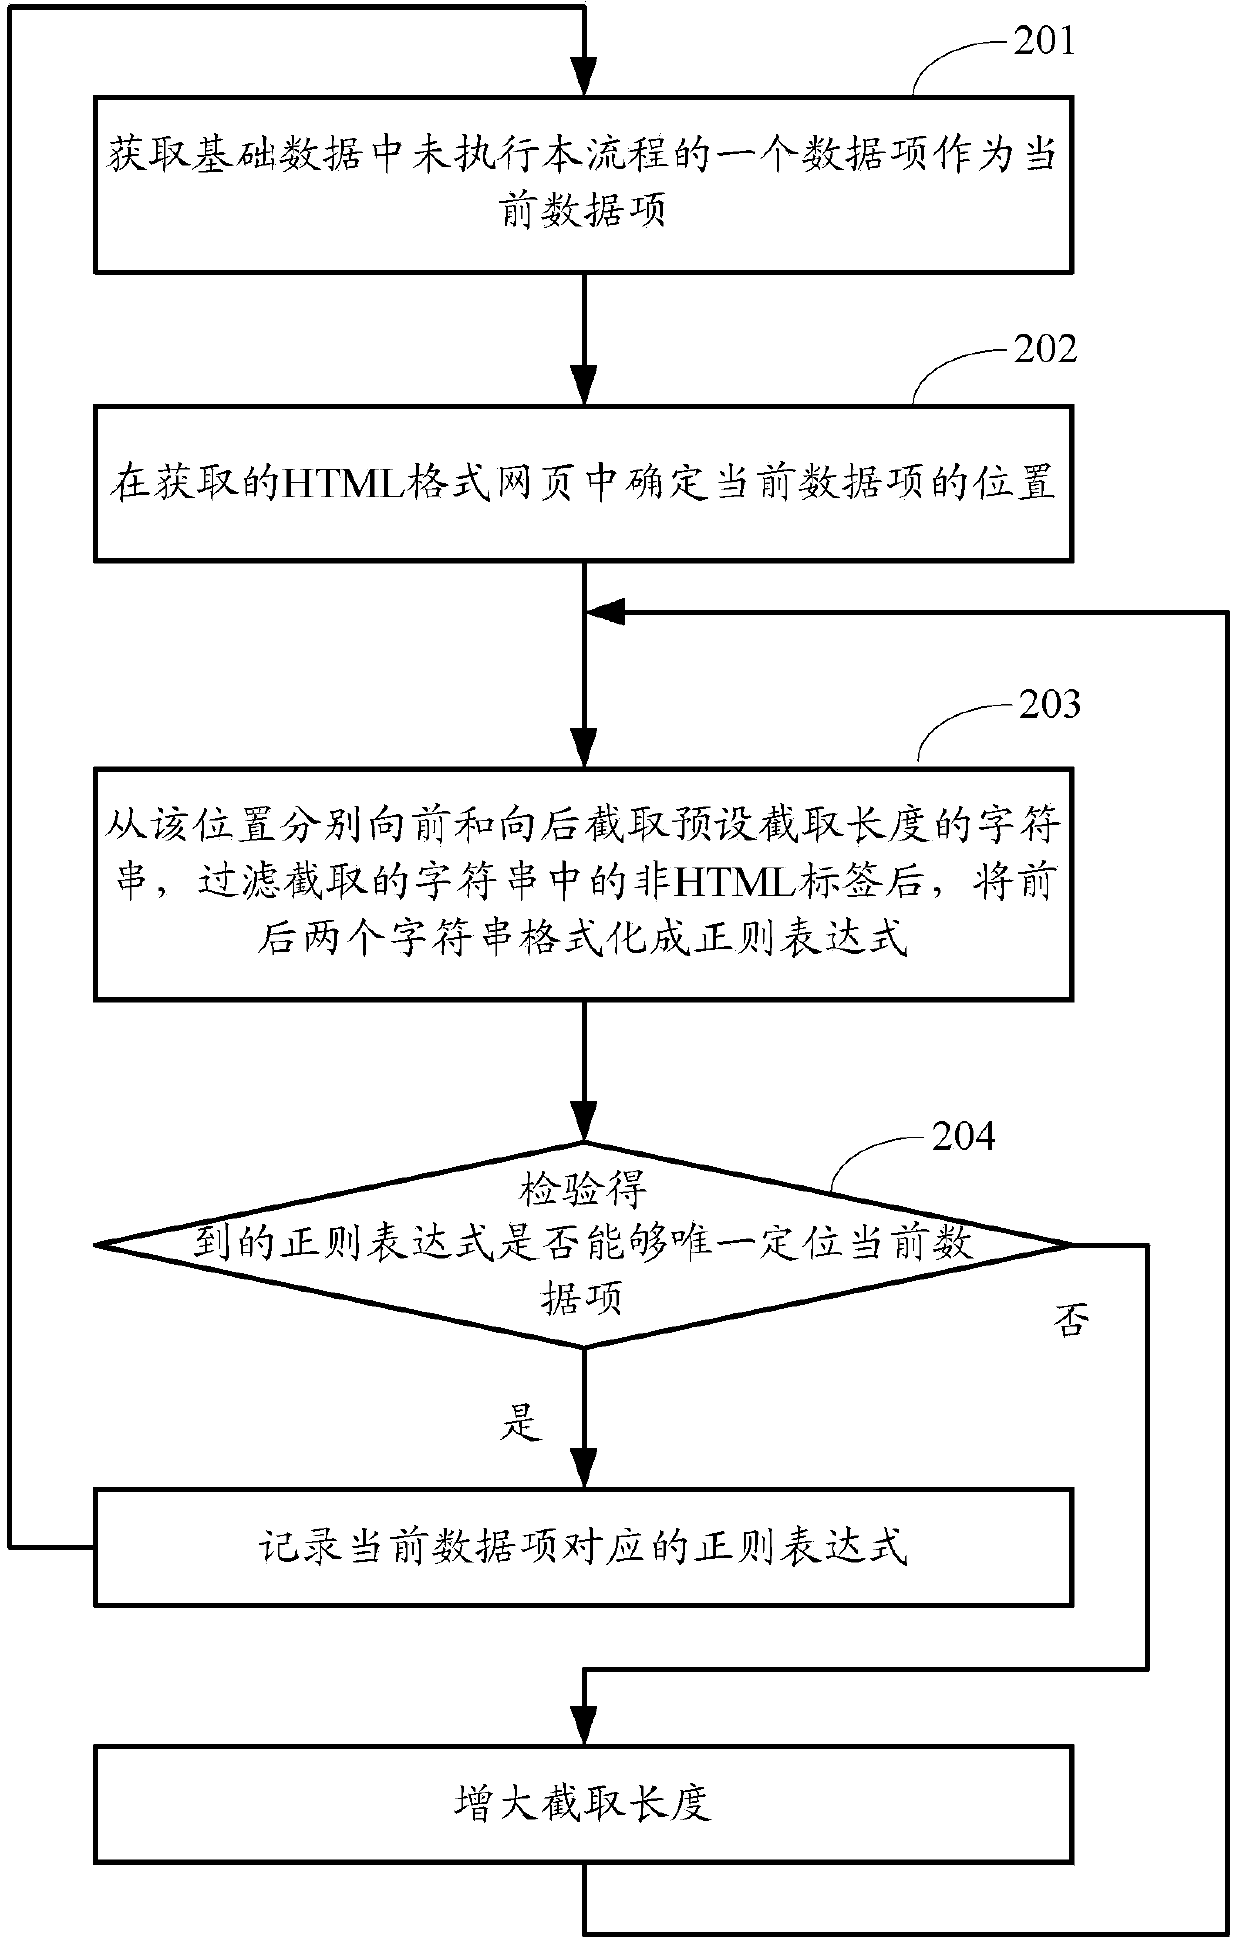 Patent information analysis method and device